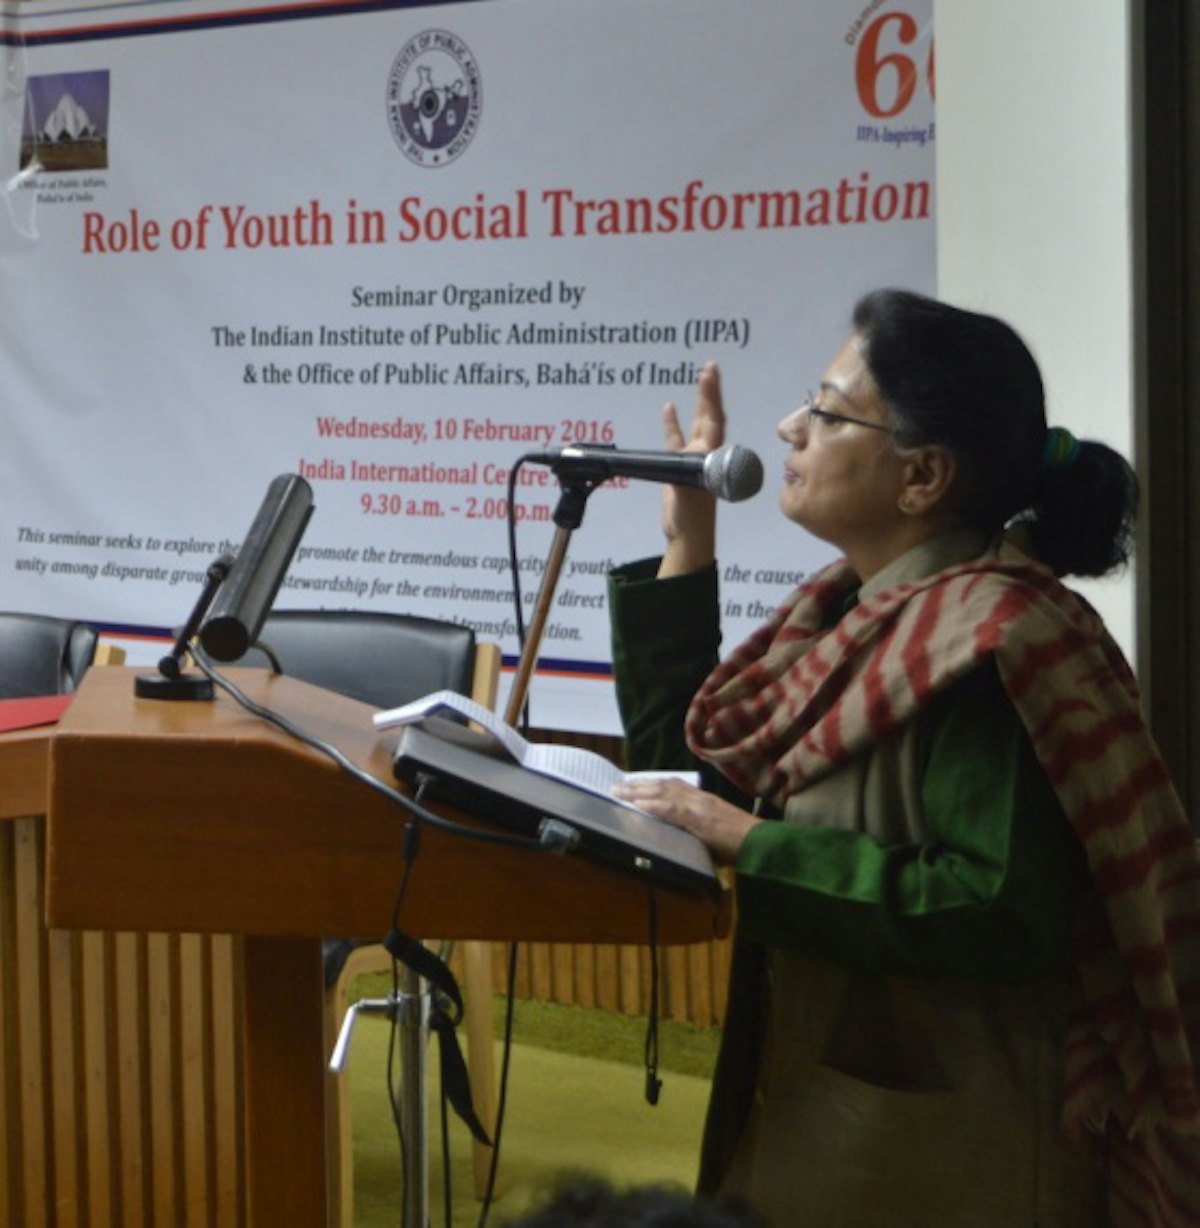 Dr. Sabina Kidwai—Associate Professor, Mass Communication, Jamia Millia Islamia—presents during a panel discussion on the impact of media on youth.